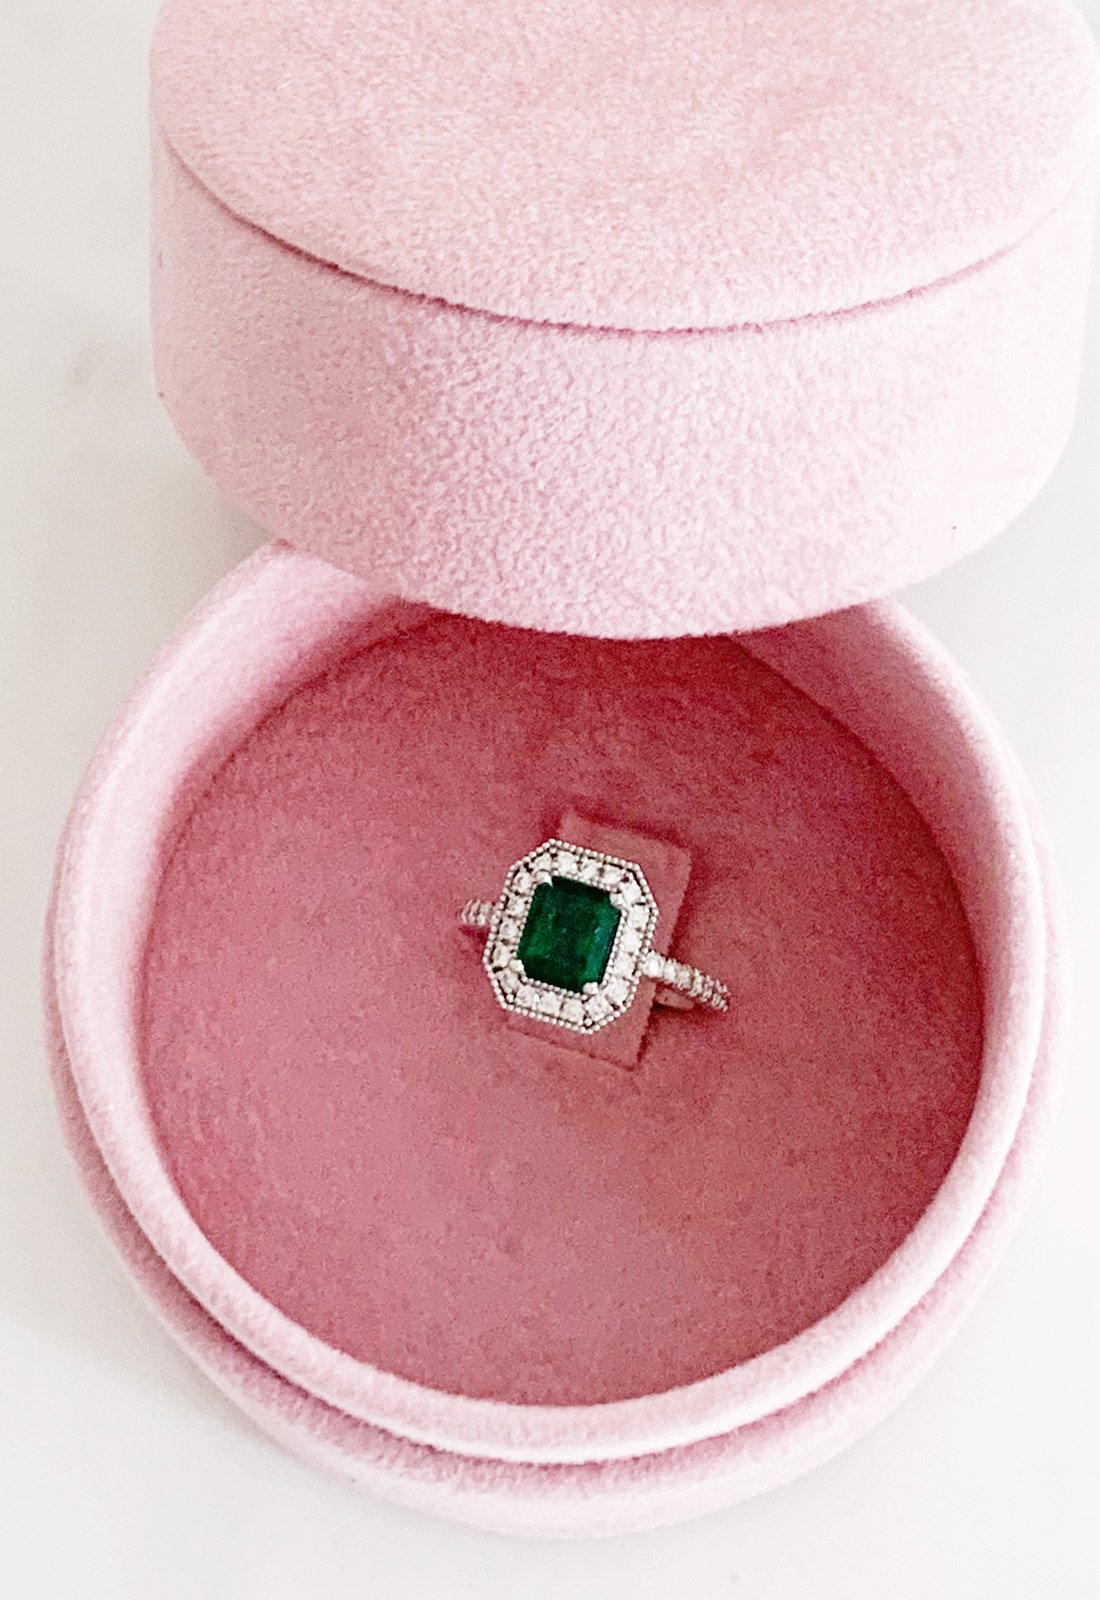 Custom-made ring - 18k white gold and emerald